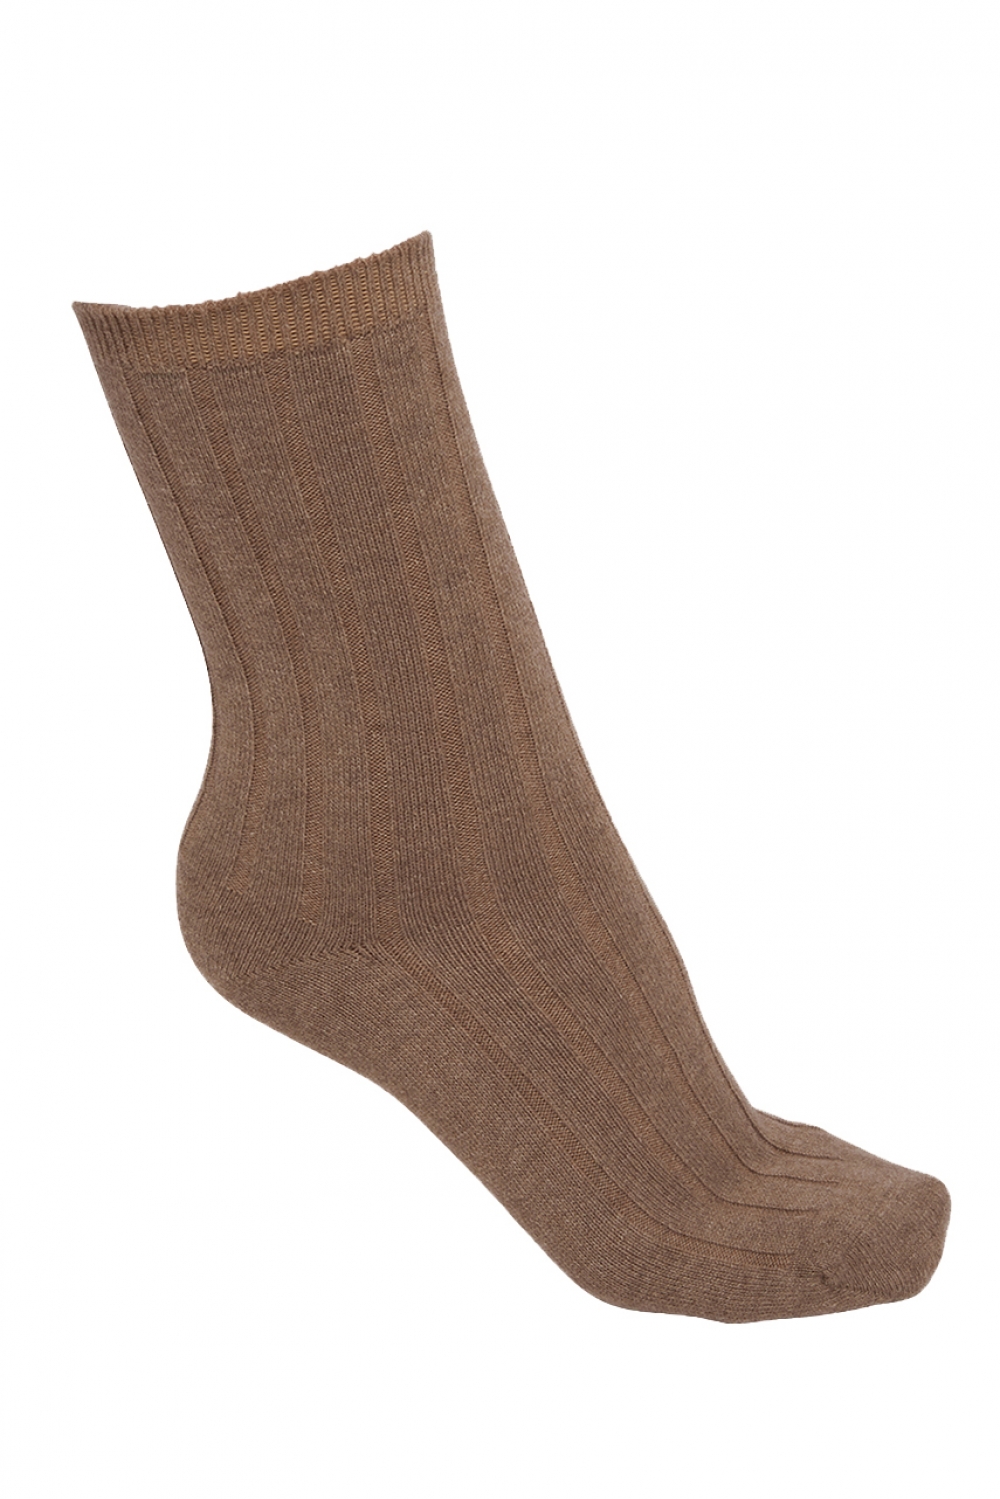 Cachemire & Elasthanne pull femme dragibus w natural brown 39 42